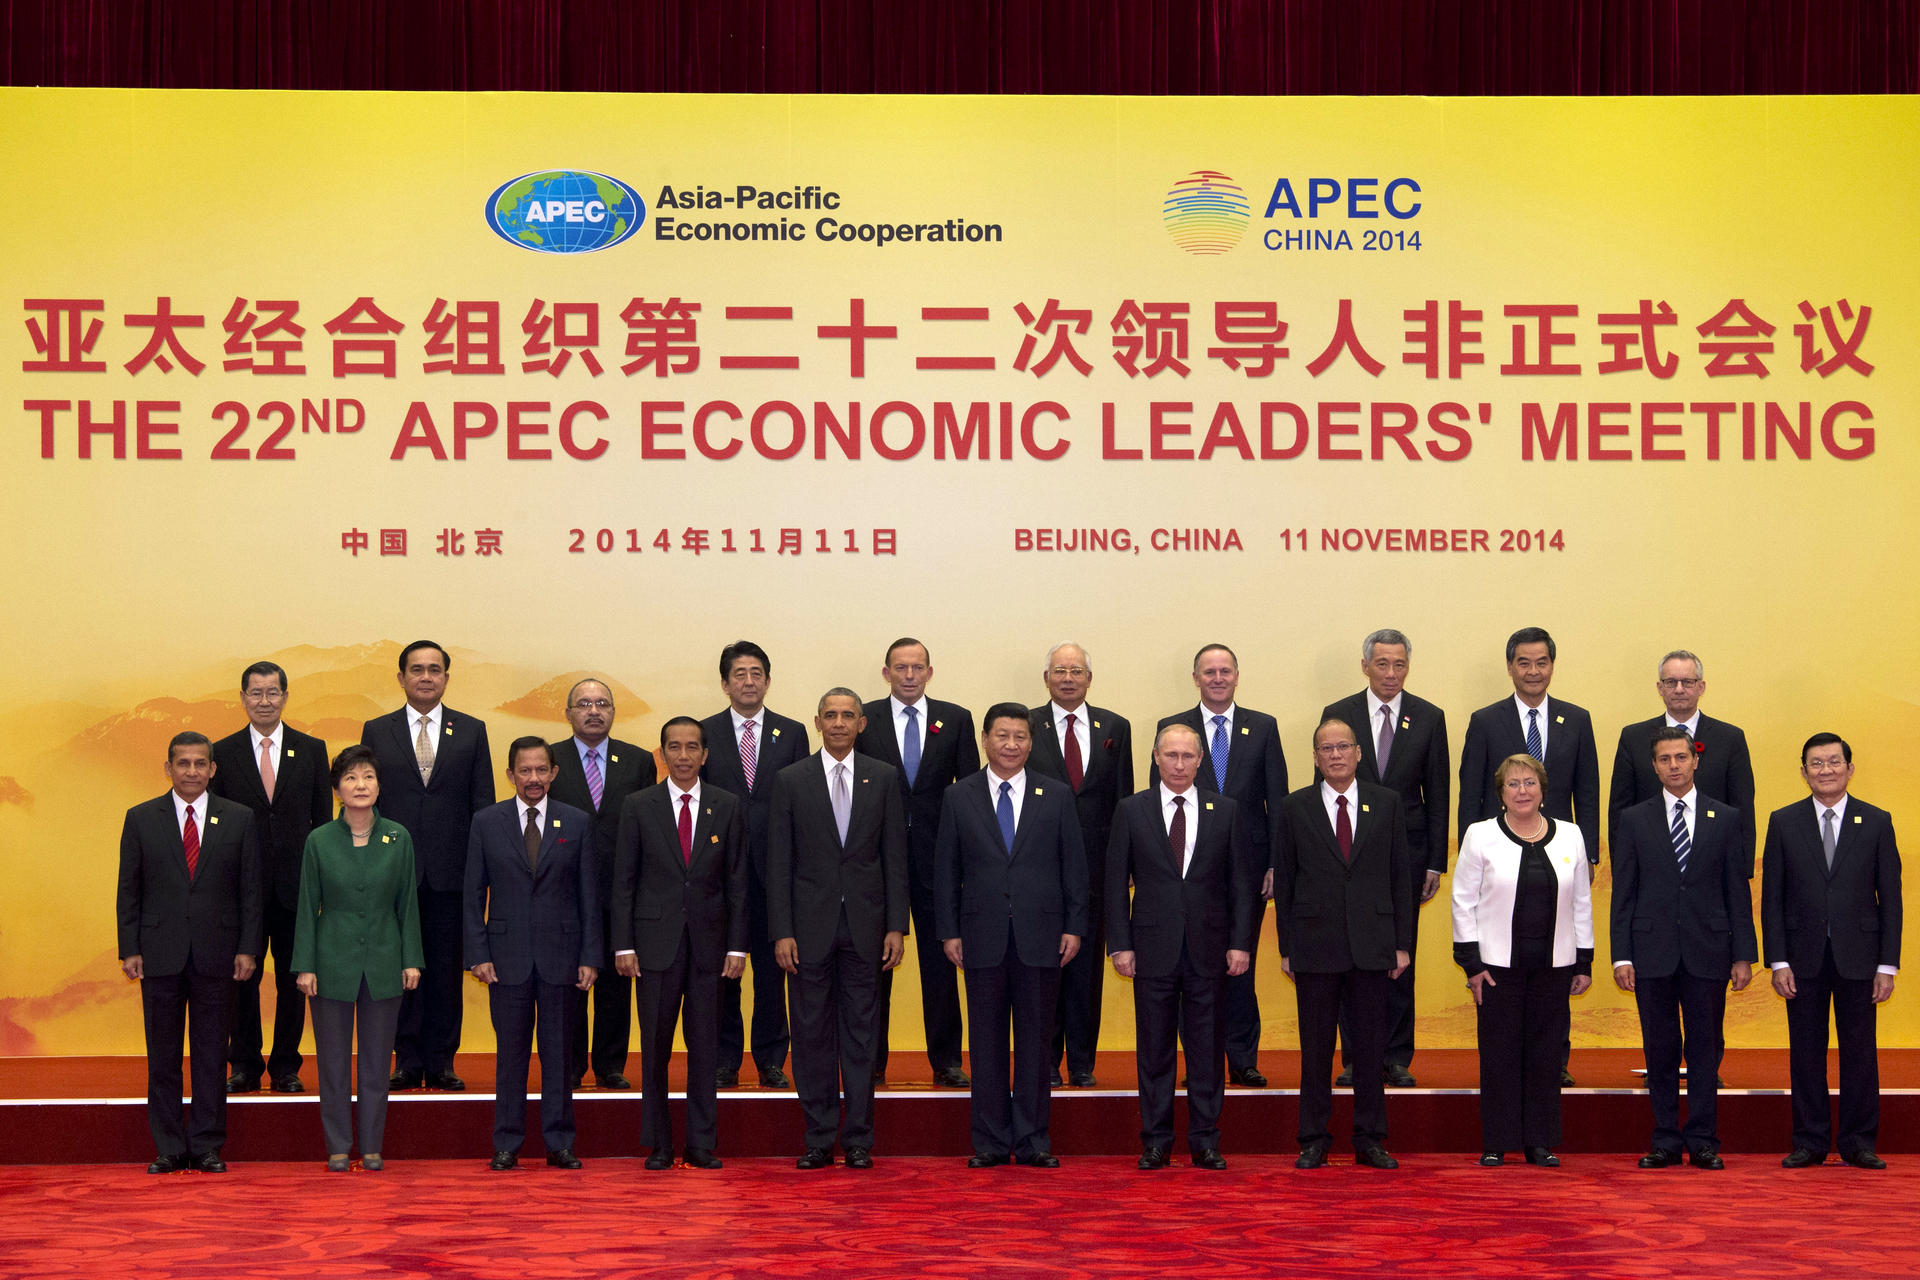 Xi Jinping, Vladimir Putin and Barack Obama are prominent at the Apec photo shoot. Widodo and Aquino are pushed aside. Photo: AP